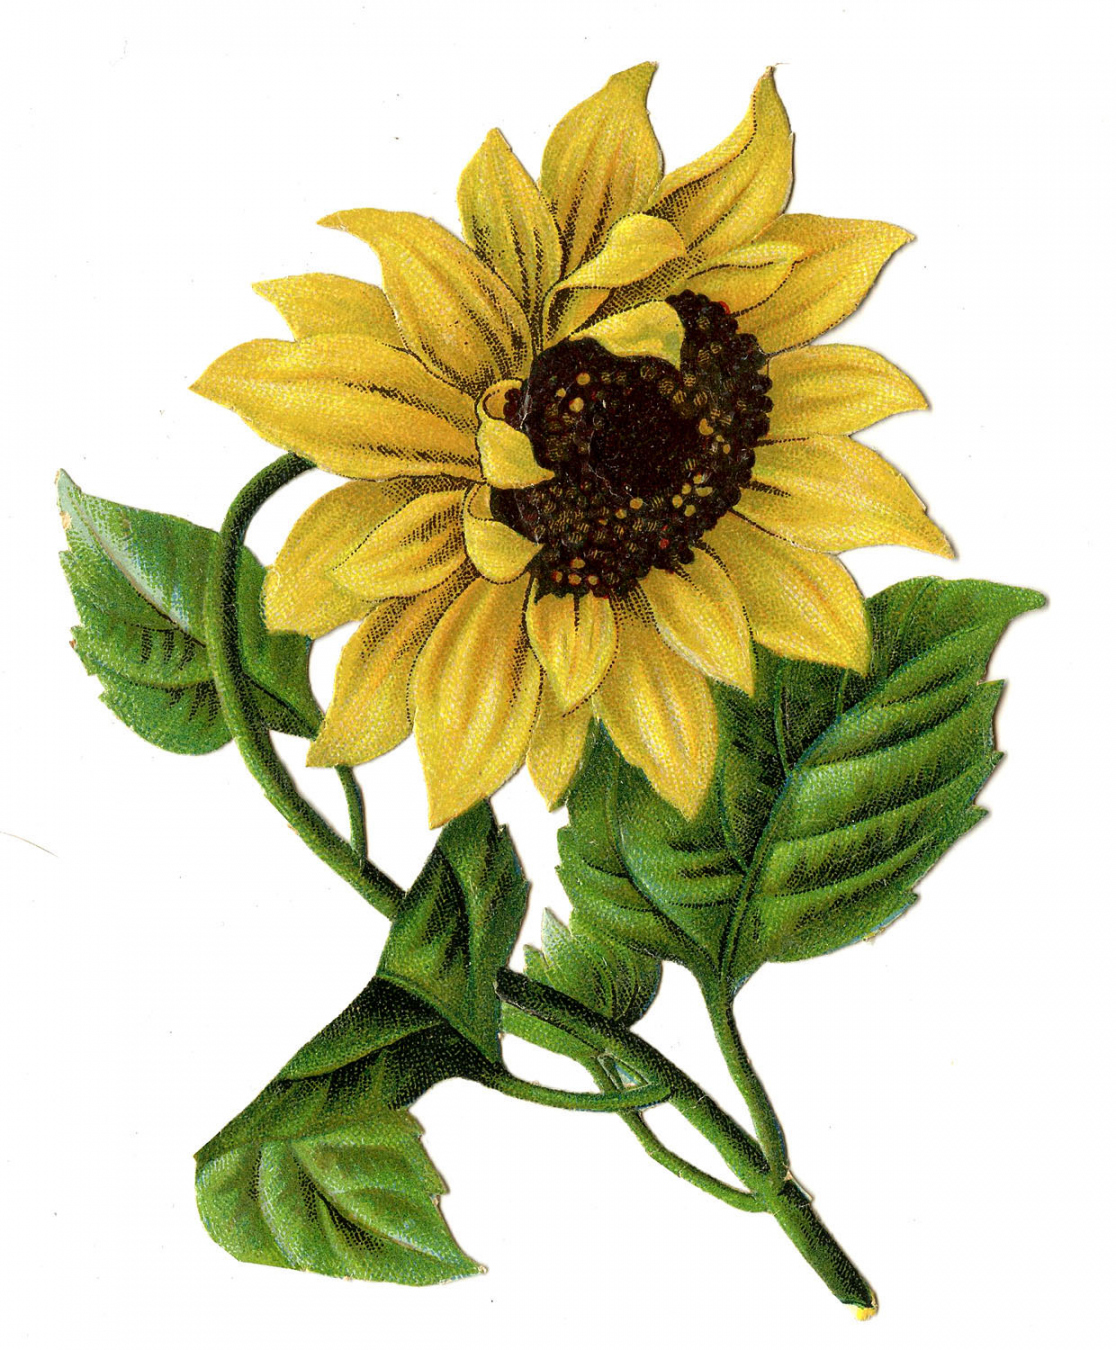 Sunflower Images - Beautiful Pictures! - The Graphics Fairy - FREE Printables - Free Printable Sunflower Images